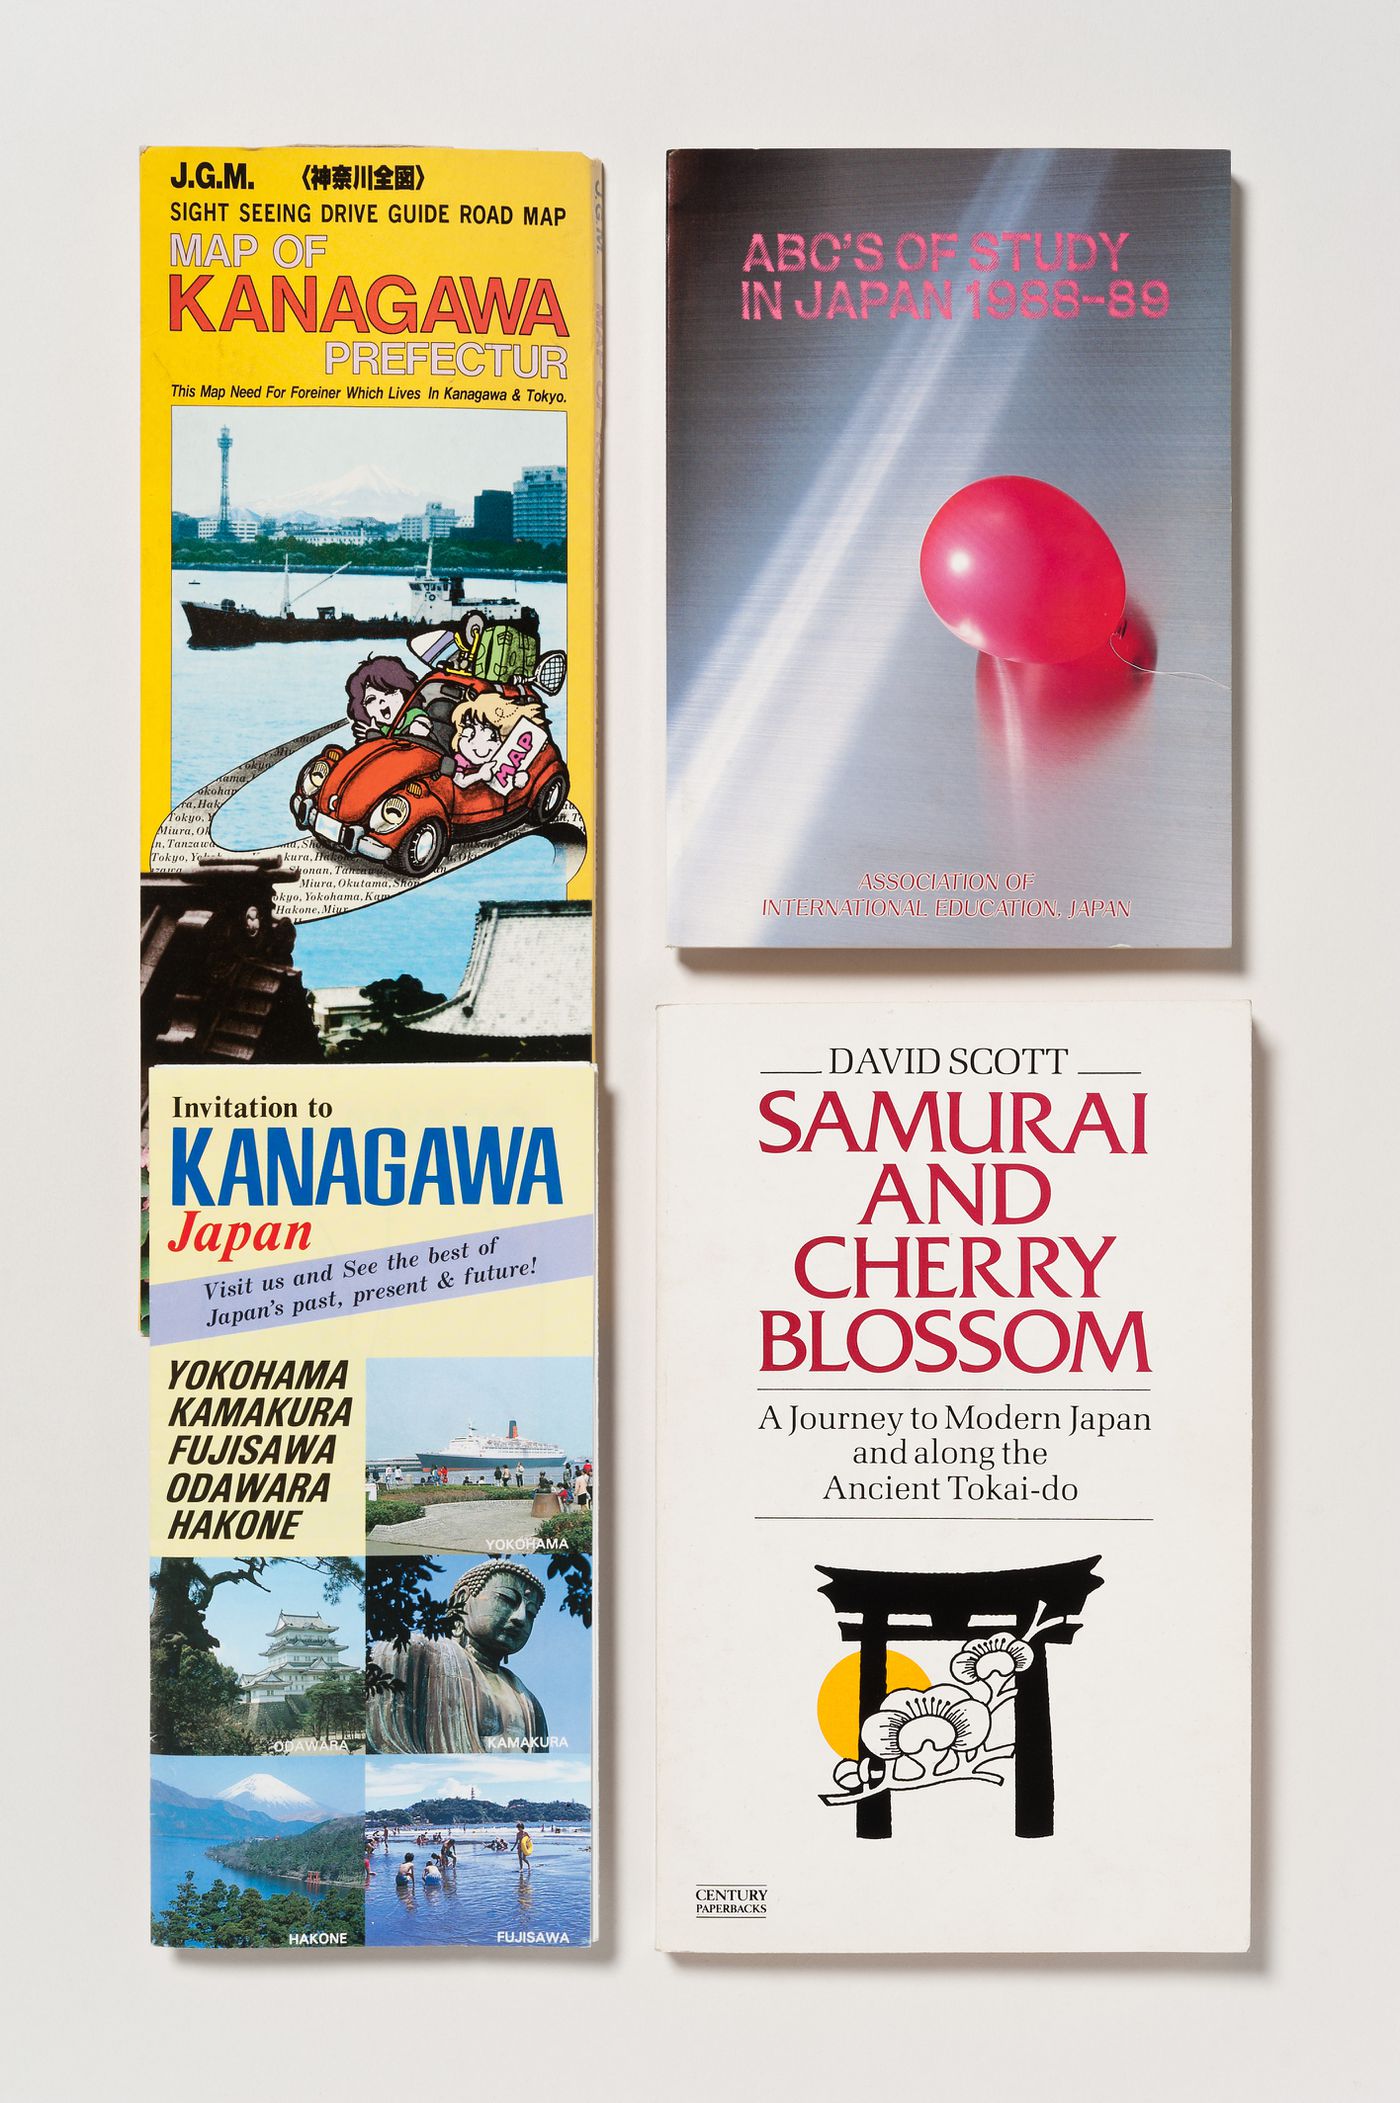 ABC's of study in Japan 1988-89.